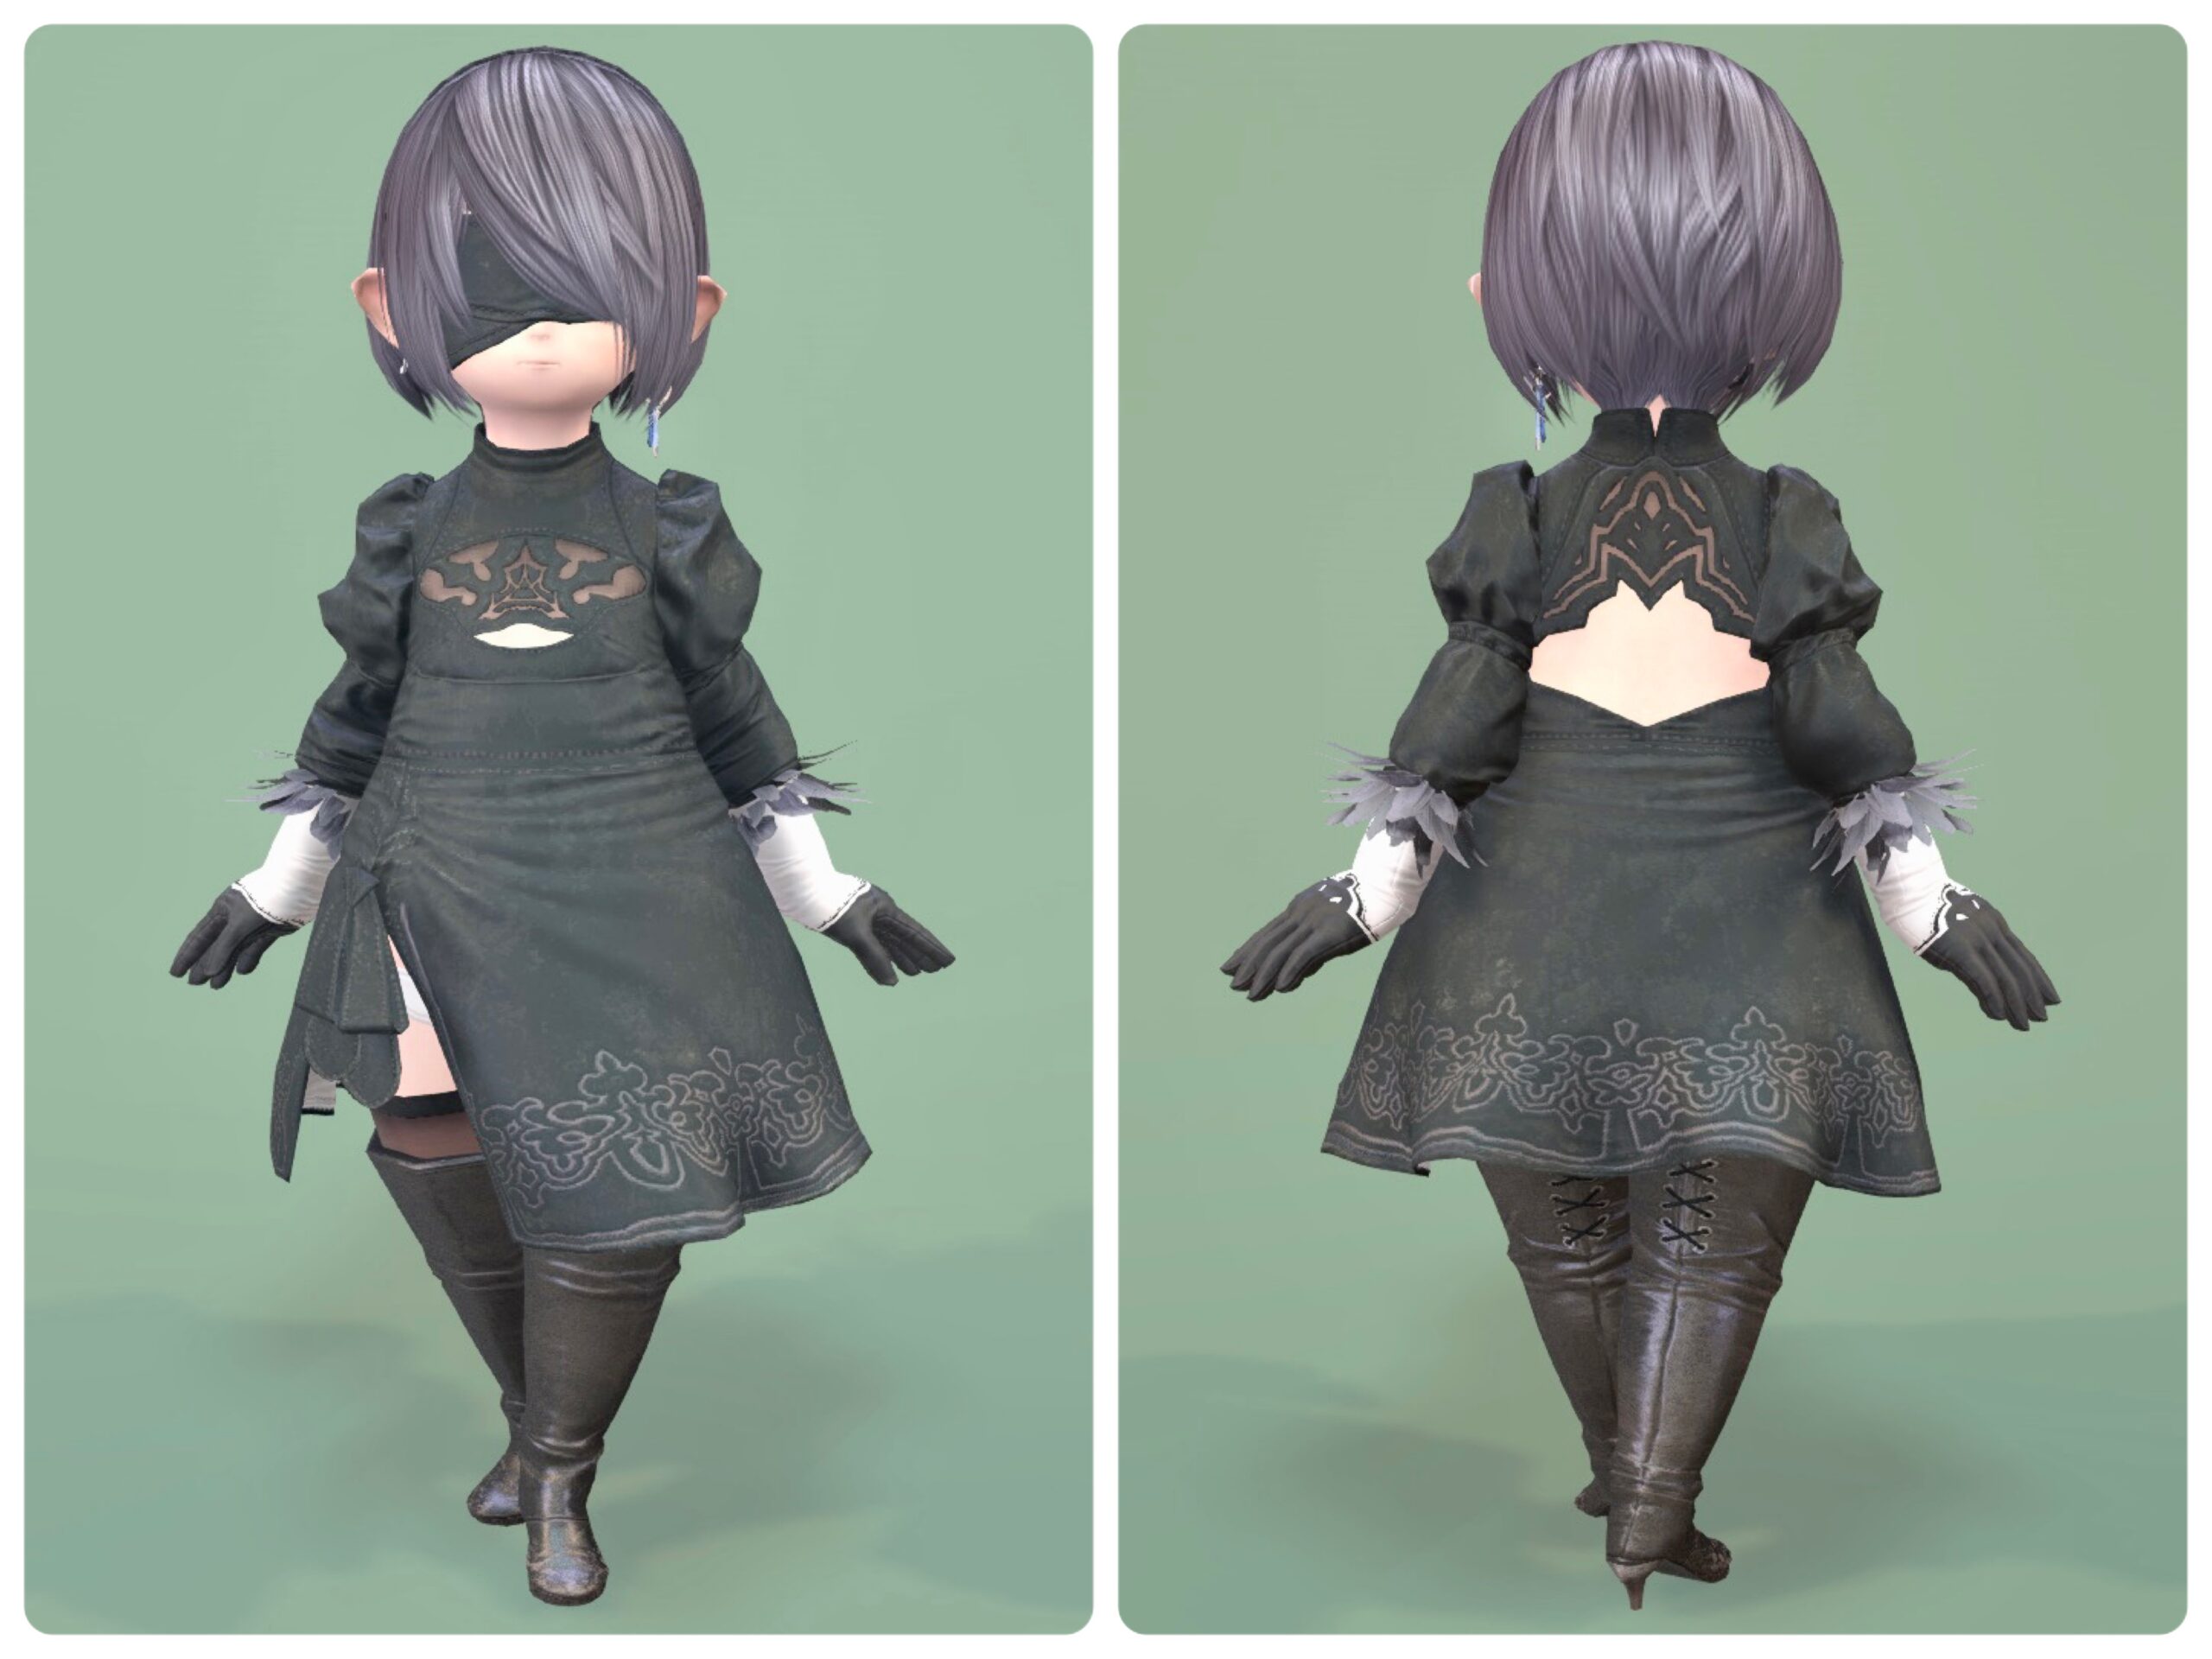 Glamour] I tried cosplaying NieR:Automata 2B | Norirow Note in FF14